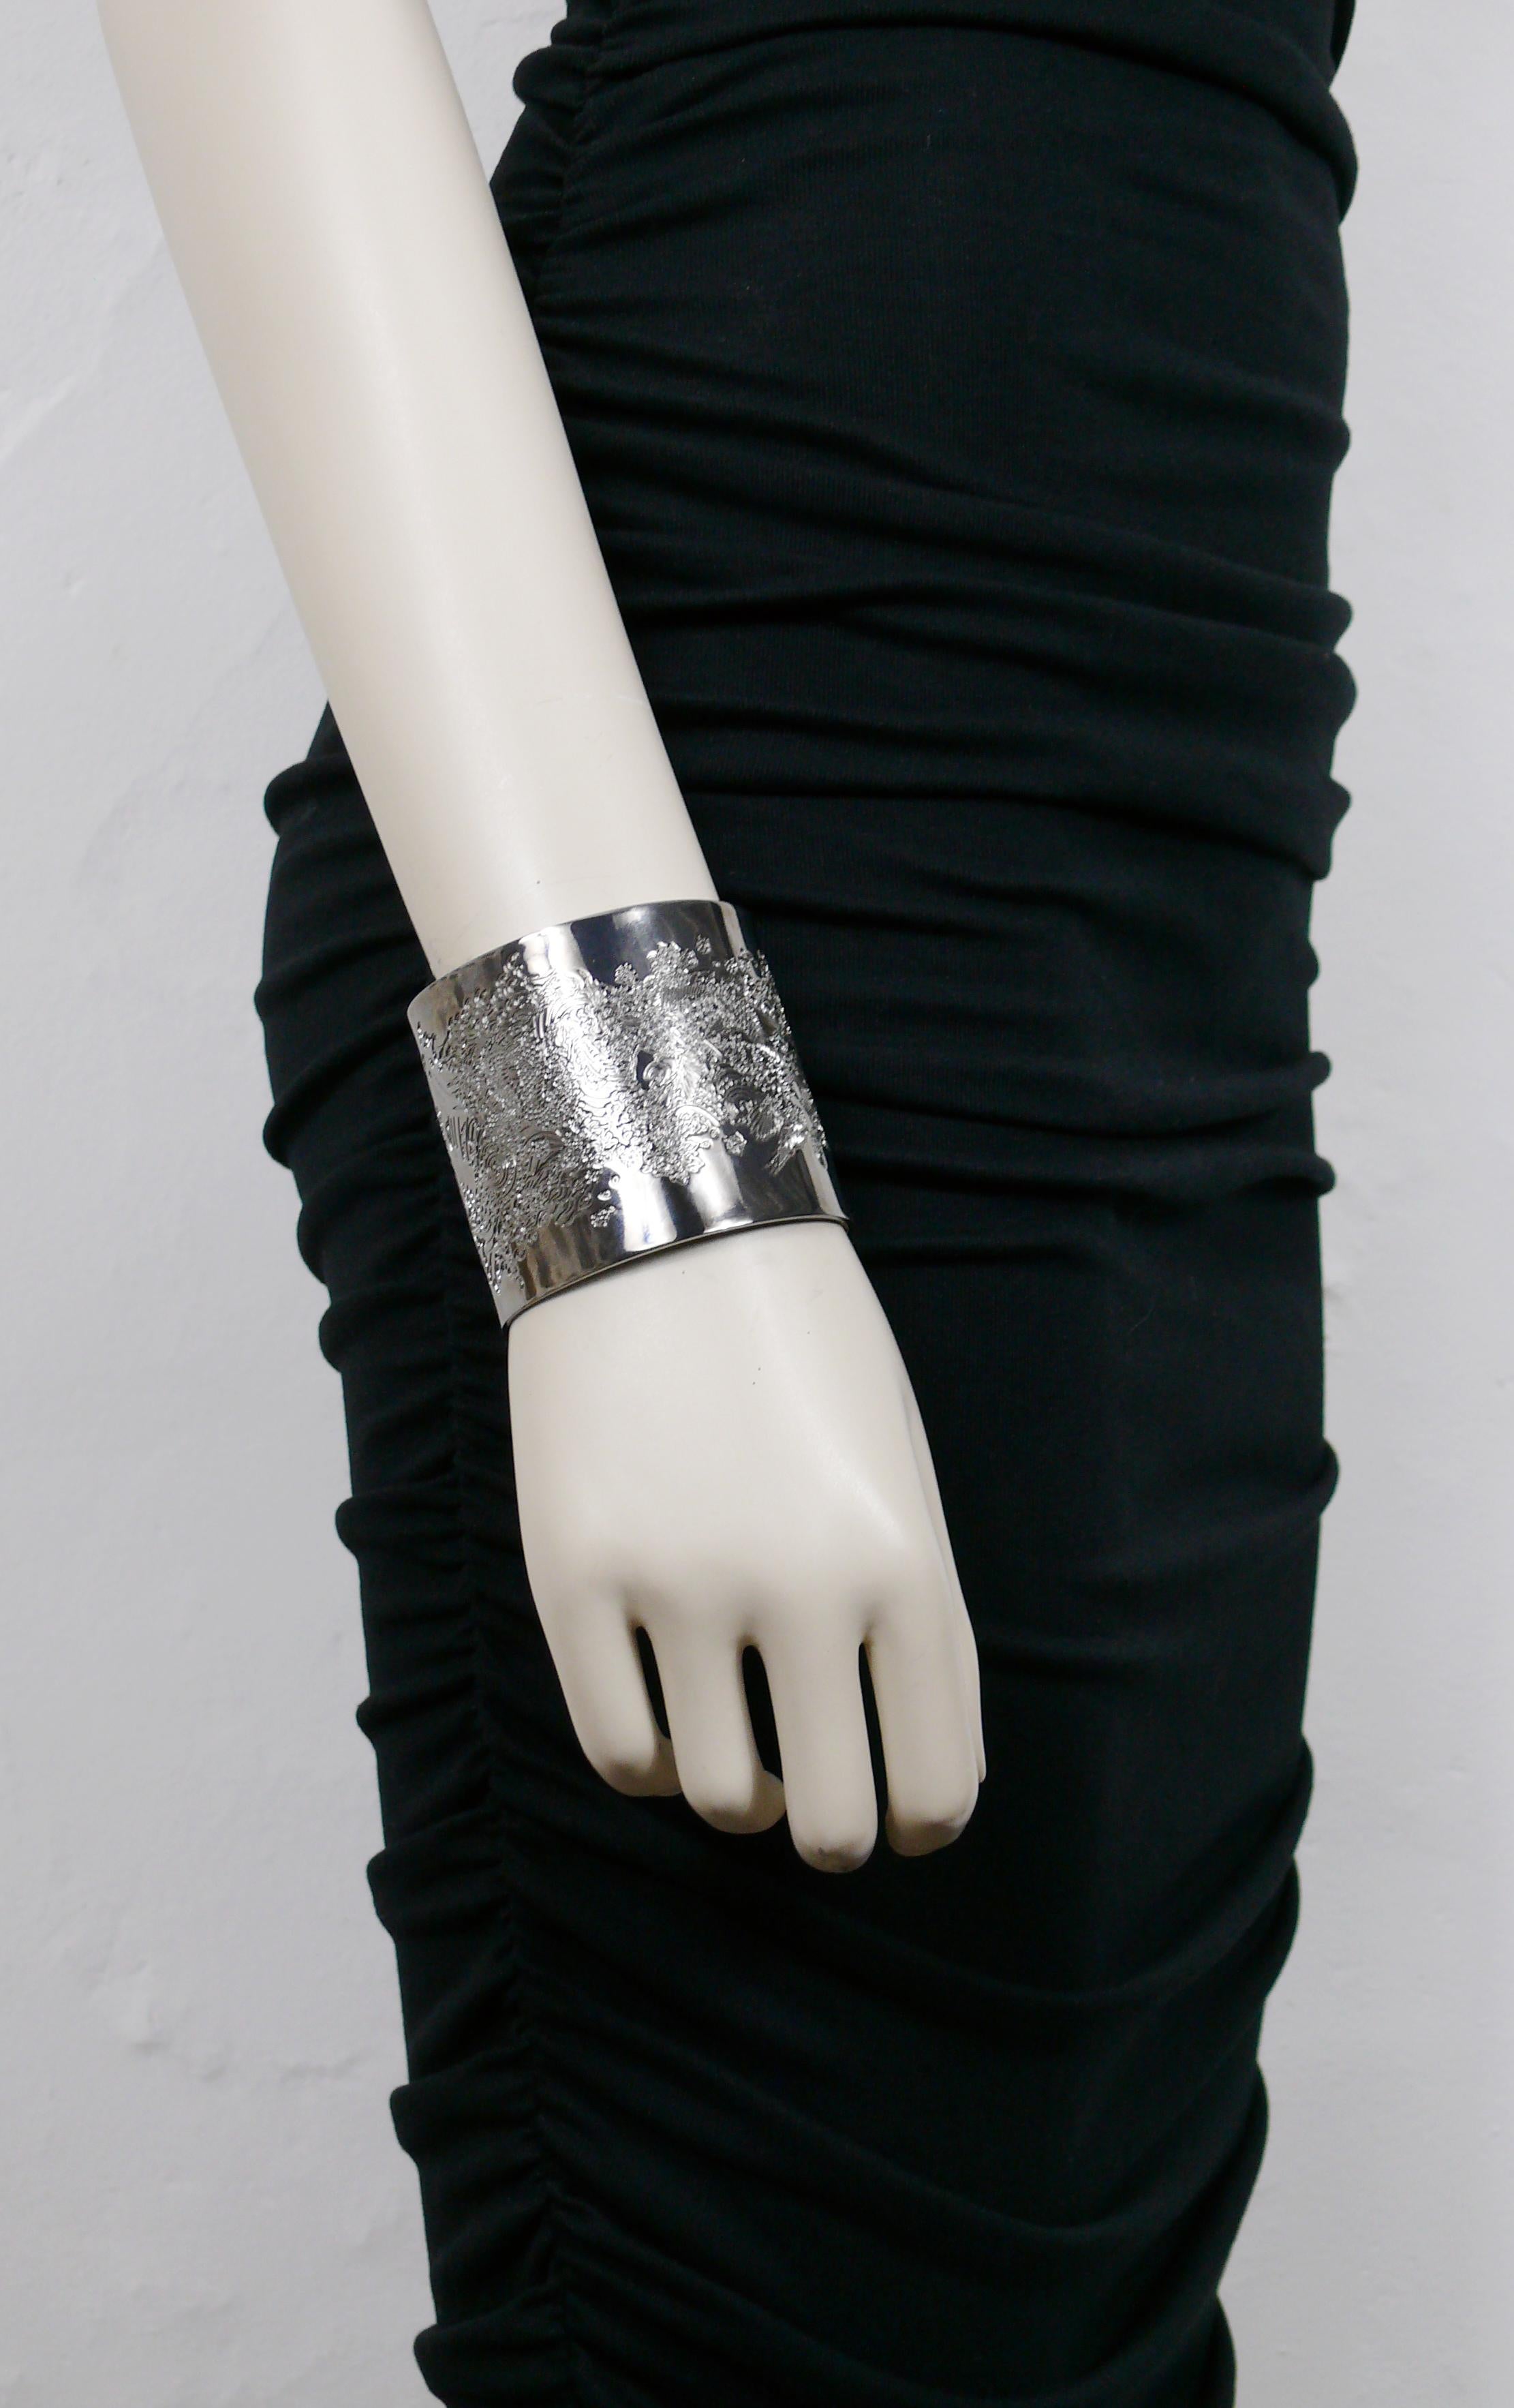 JEAN PAUL GAULTIER ruthenium colour cuff bracelet featuring an opulent Japanase inspired koi fish tattoo engraving.

Embossed JEAN PAUL GAULTIER.

Indicative measurements : inner circumference approx. 19.16 cm (7.54 inches) / total diameter approx.